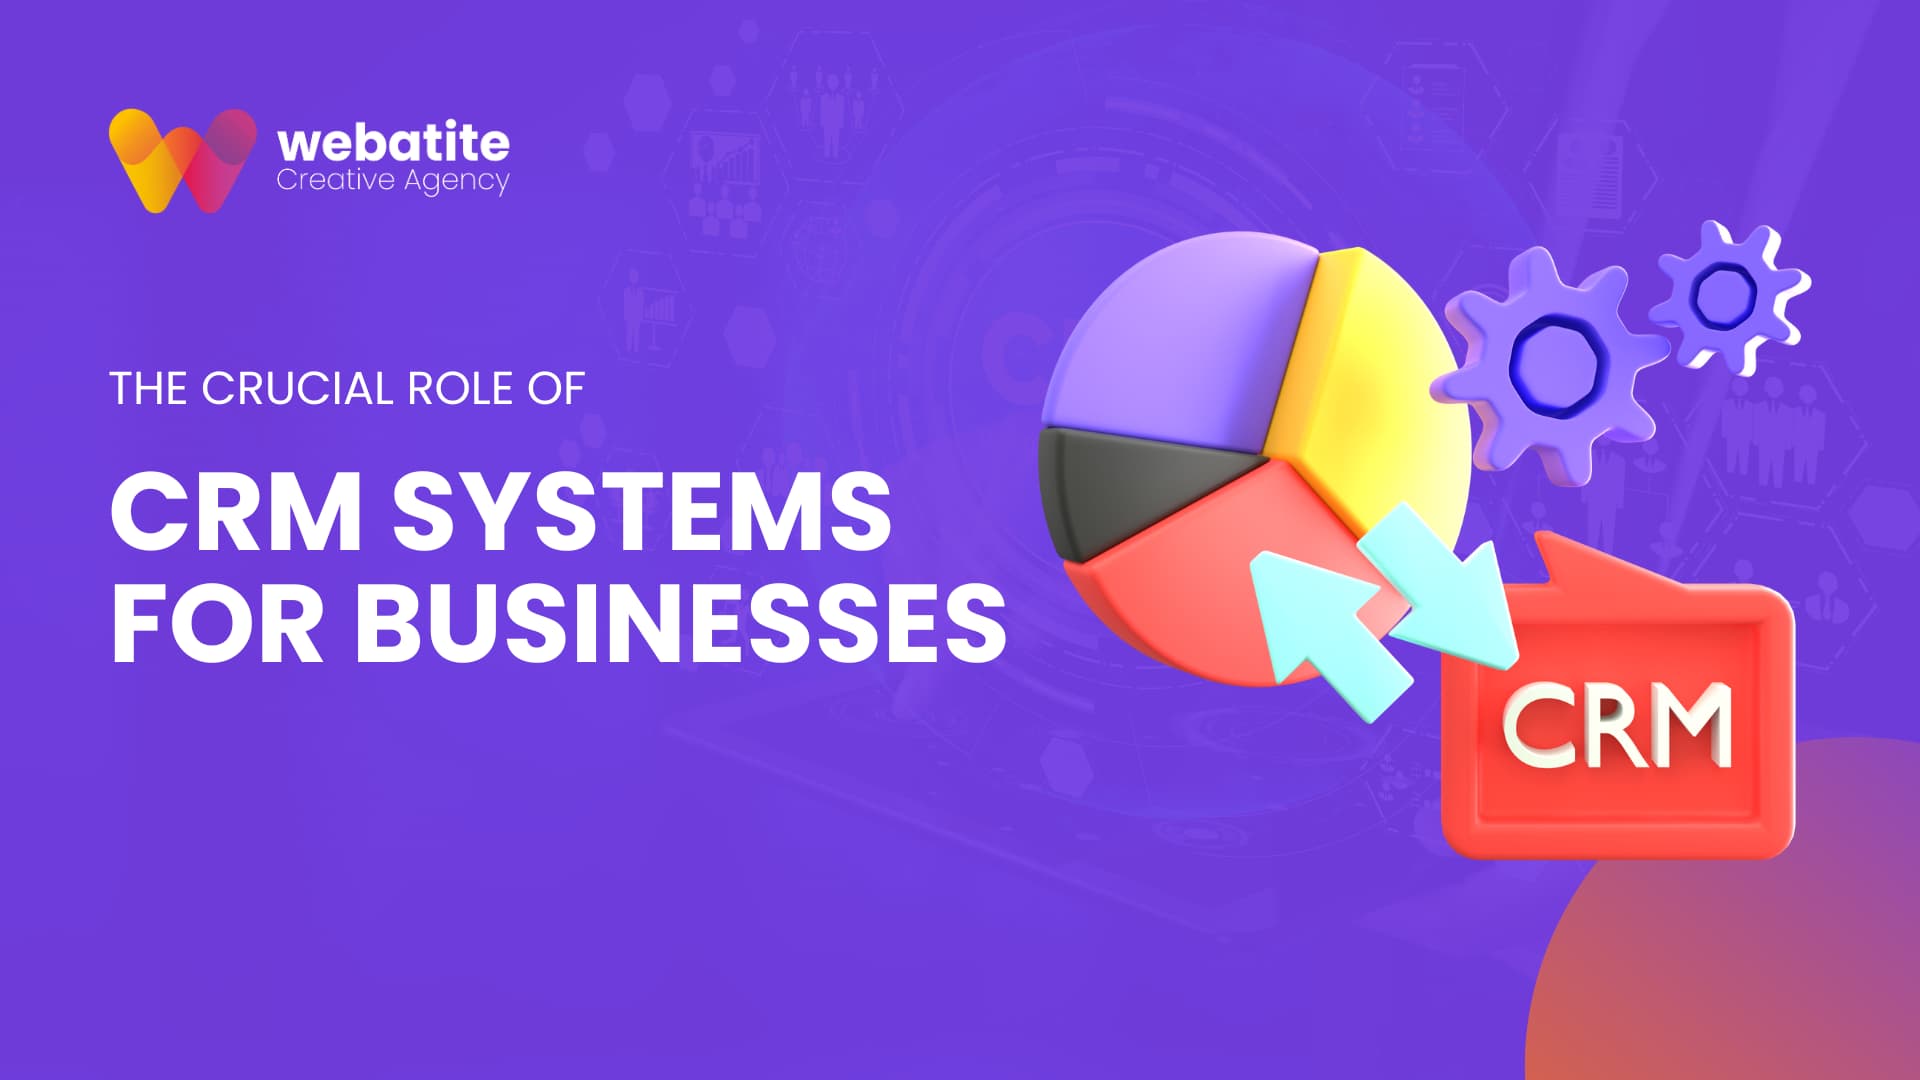 The Crucial Role of a CRM System for Businesses